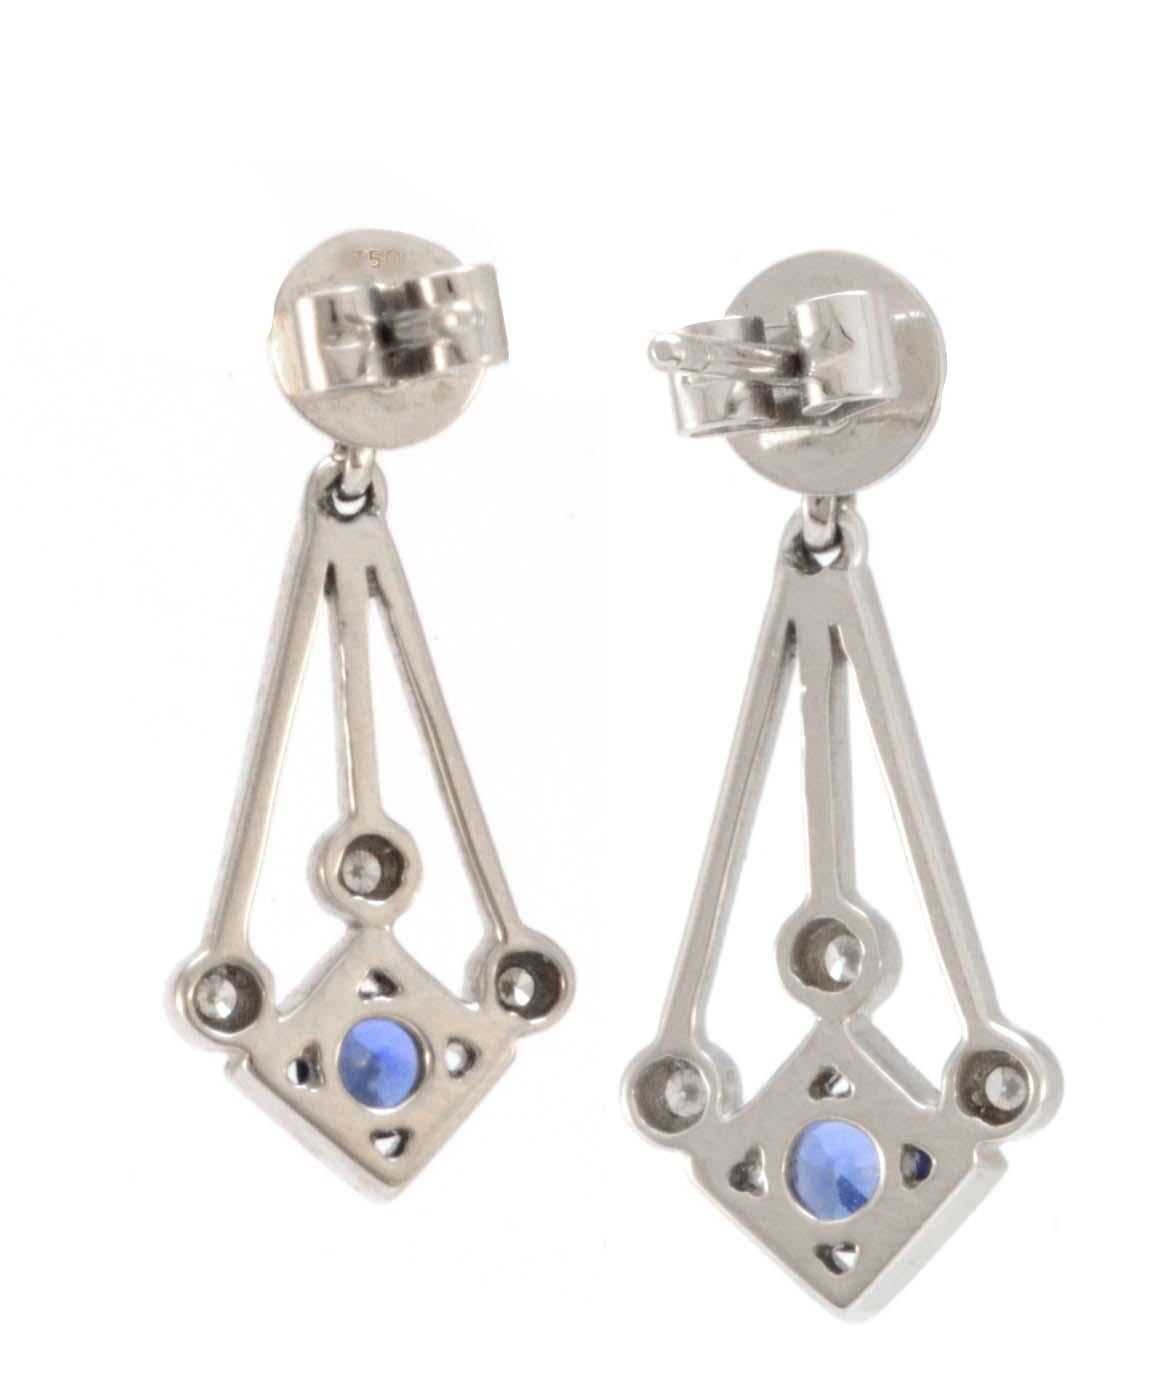 Solid 18K White Gold Sapphire & Diamond Dangle Earrings 3.3g Excellent condition. These solid 18k white gold earrings each feature a round genuine sapphire that measures approximately 3.56mm each. Each earring also contains 4 genuine diamonds. The